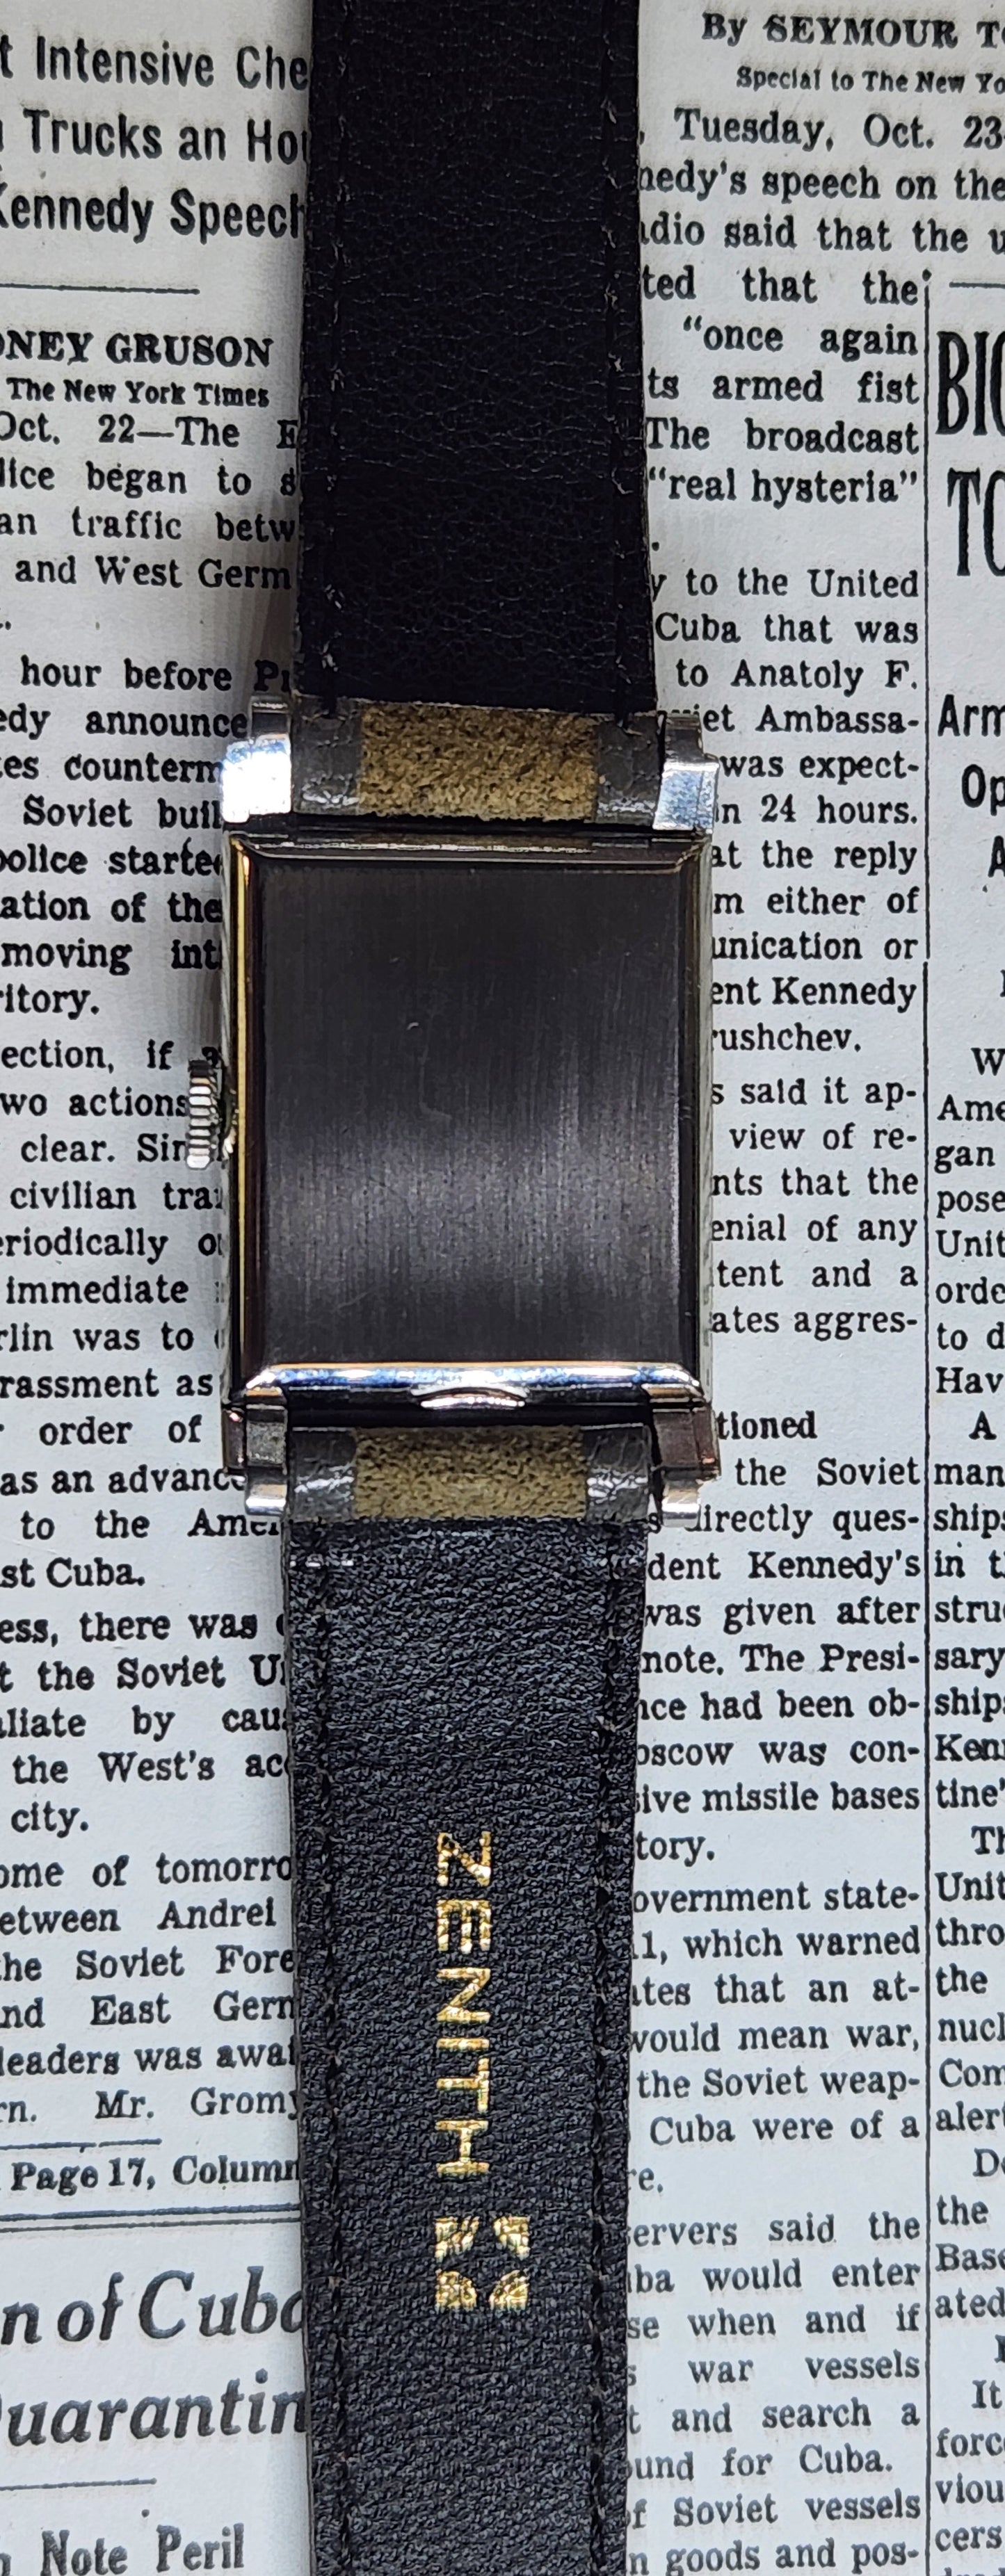 Mido Stainless Steel Rectangular Case watch from the late 1940's